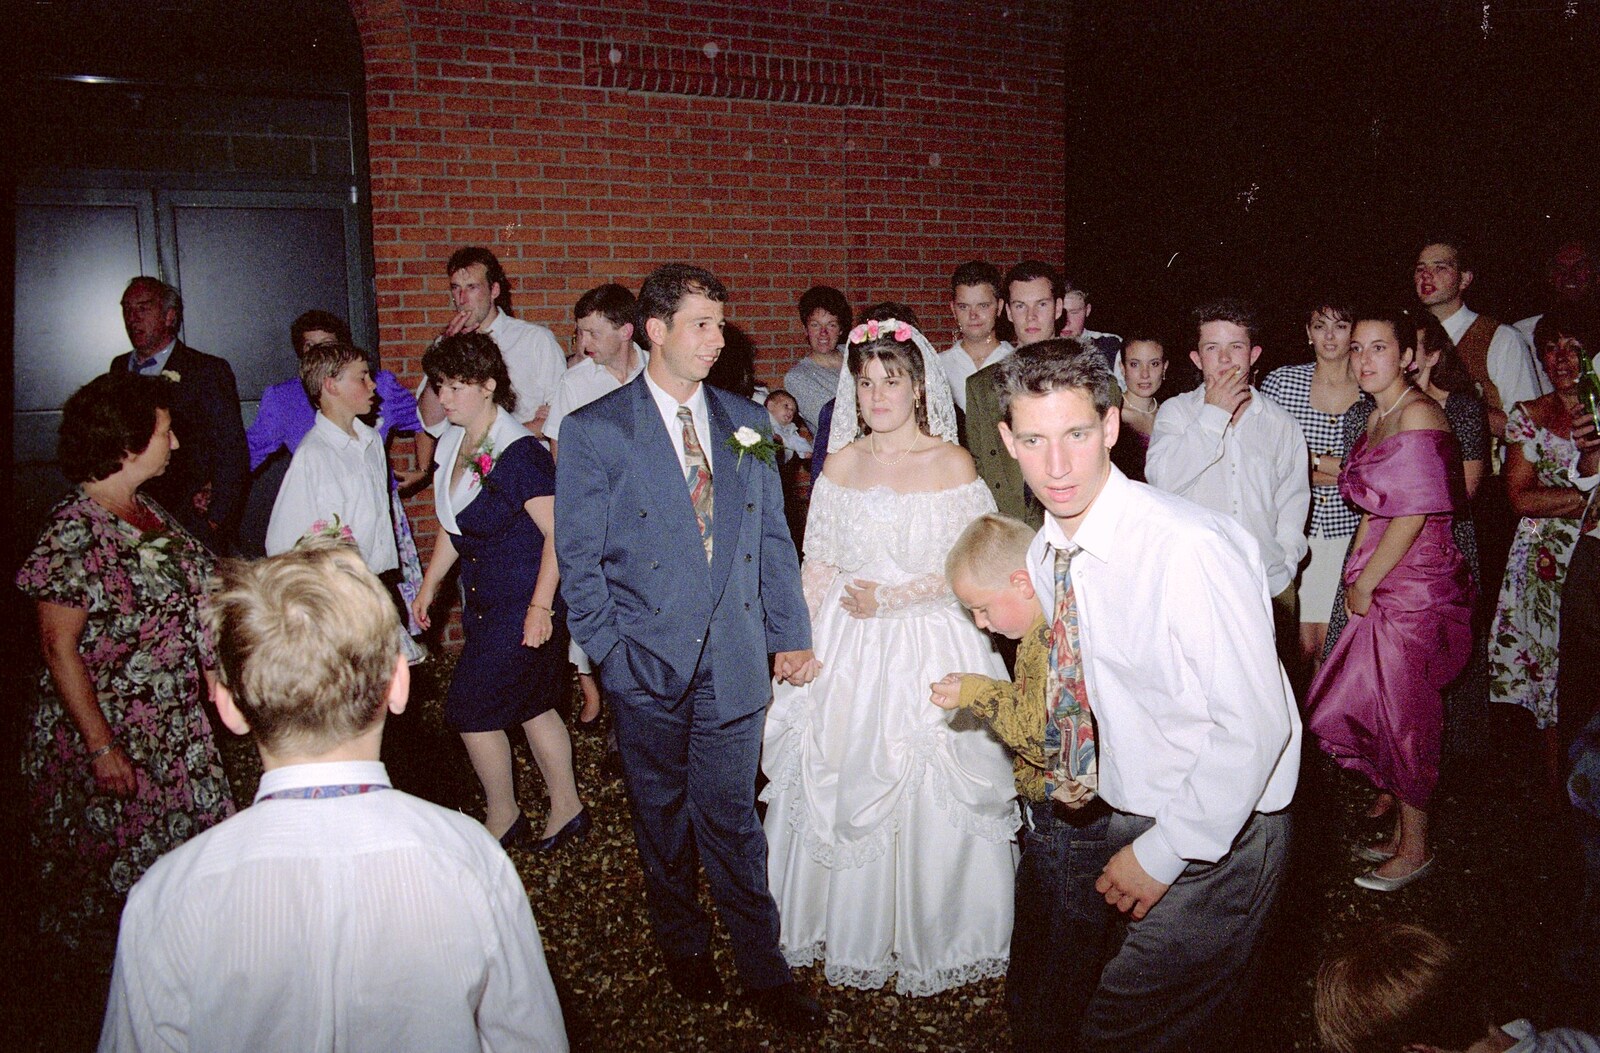 Everyone mills around for a bit from Printec Kelly's Wedding, Eye, Suffolk - 25th April 1992